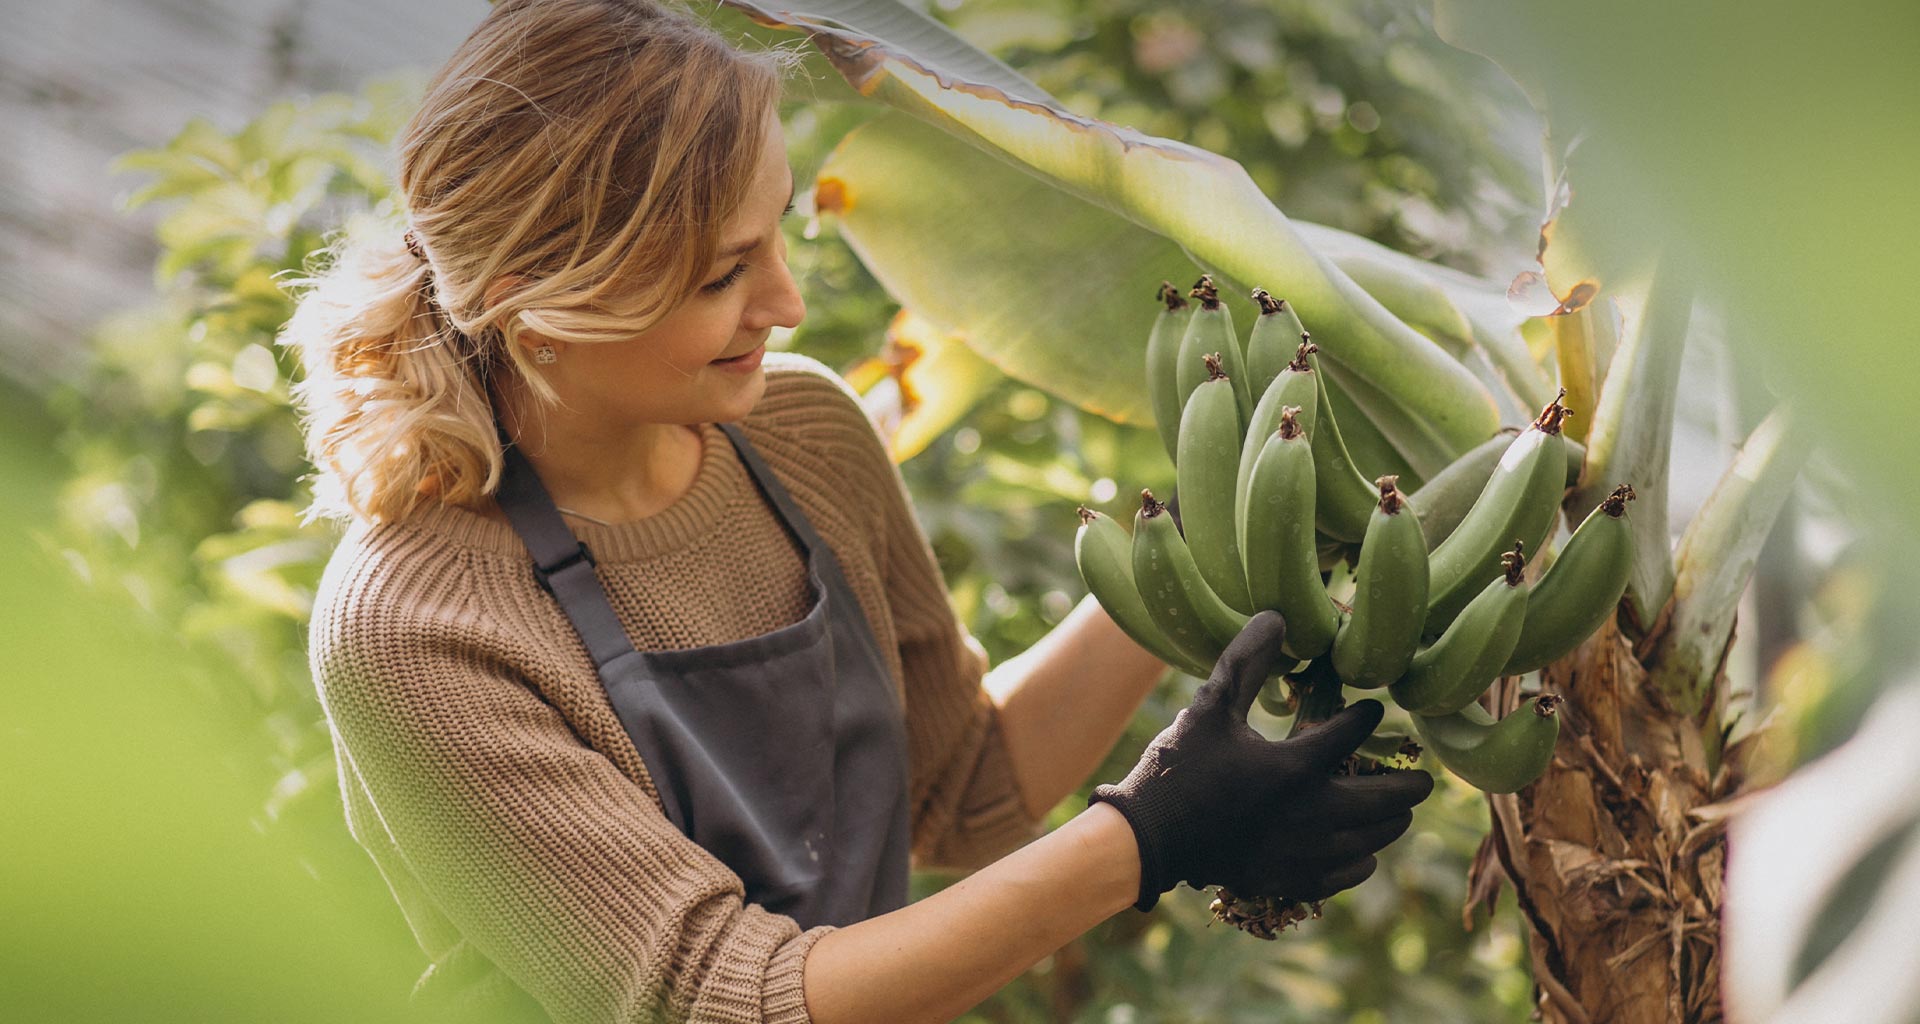 Woman Smiling and Holding a large bunch of Ecofood Bananas